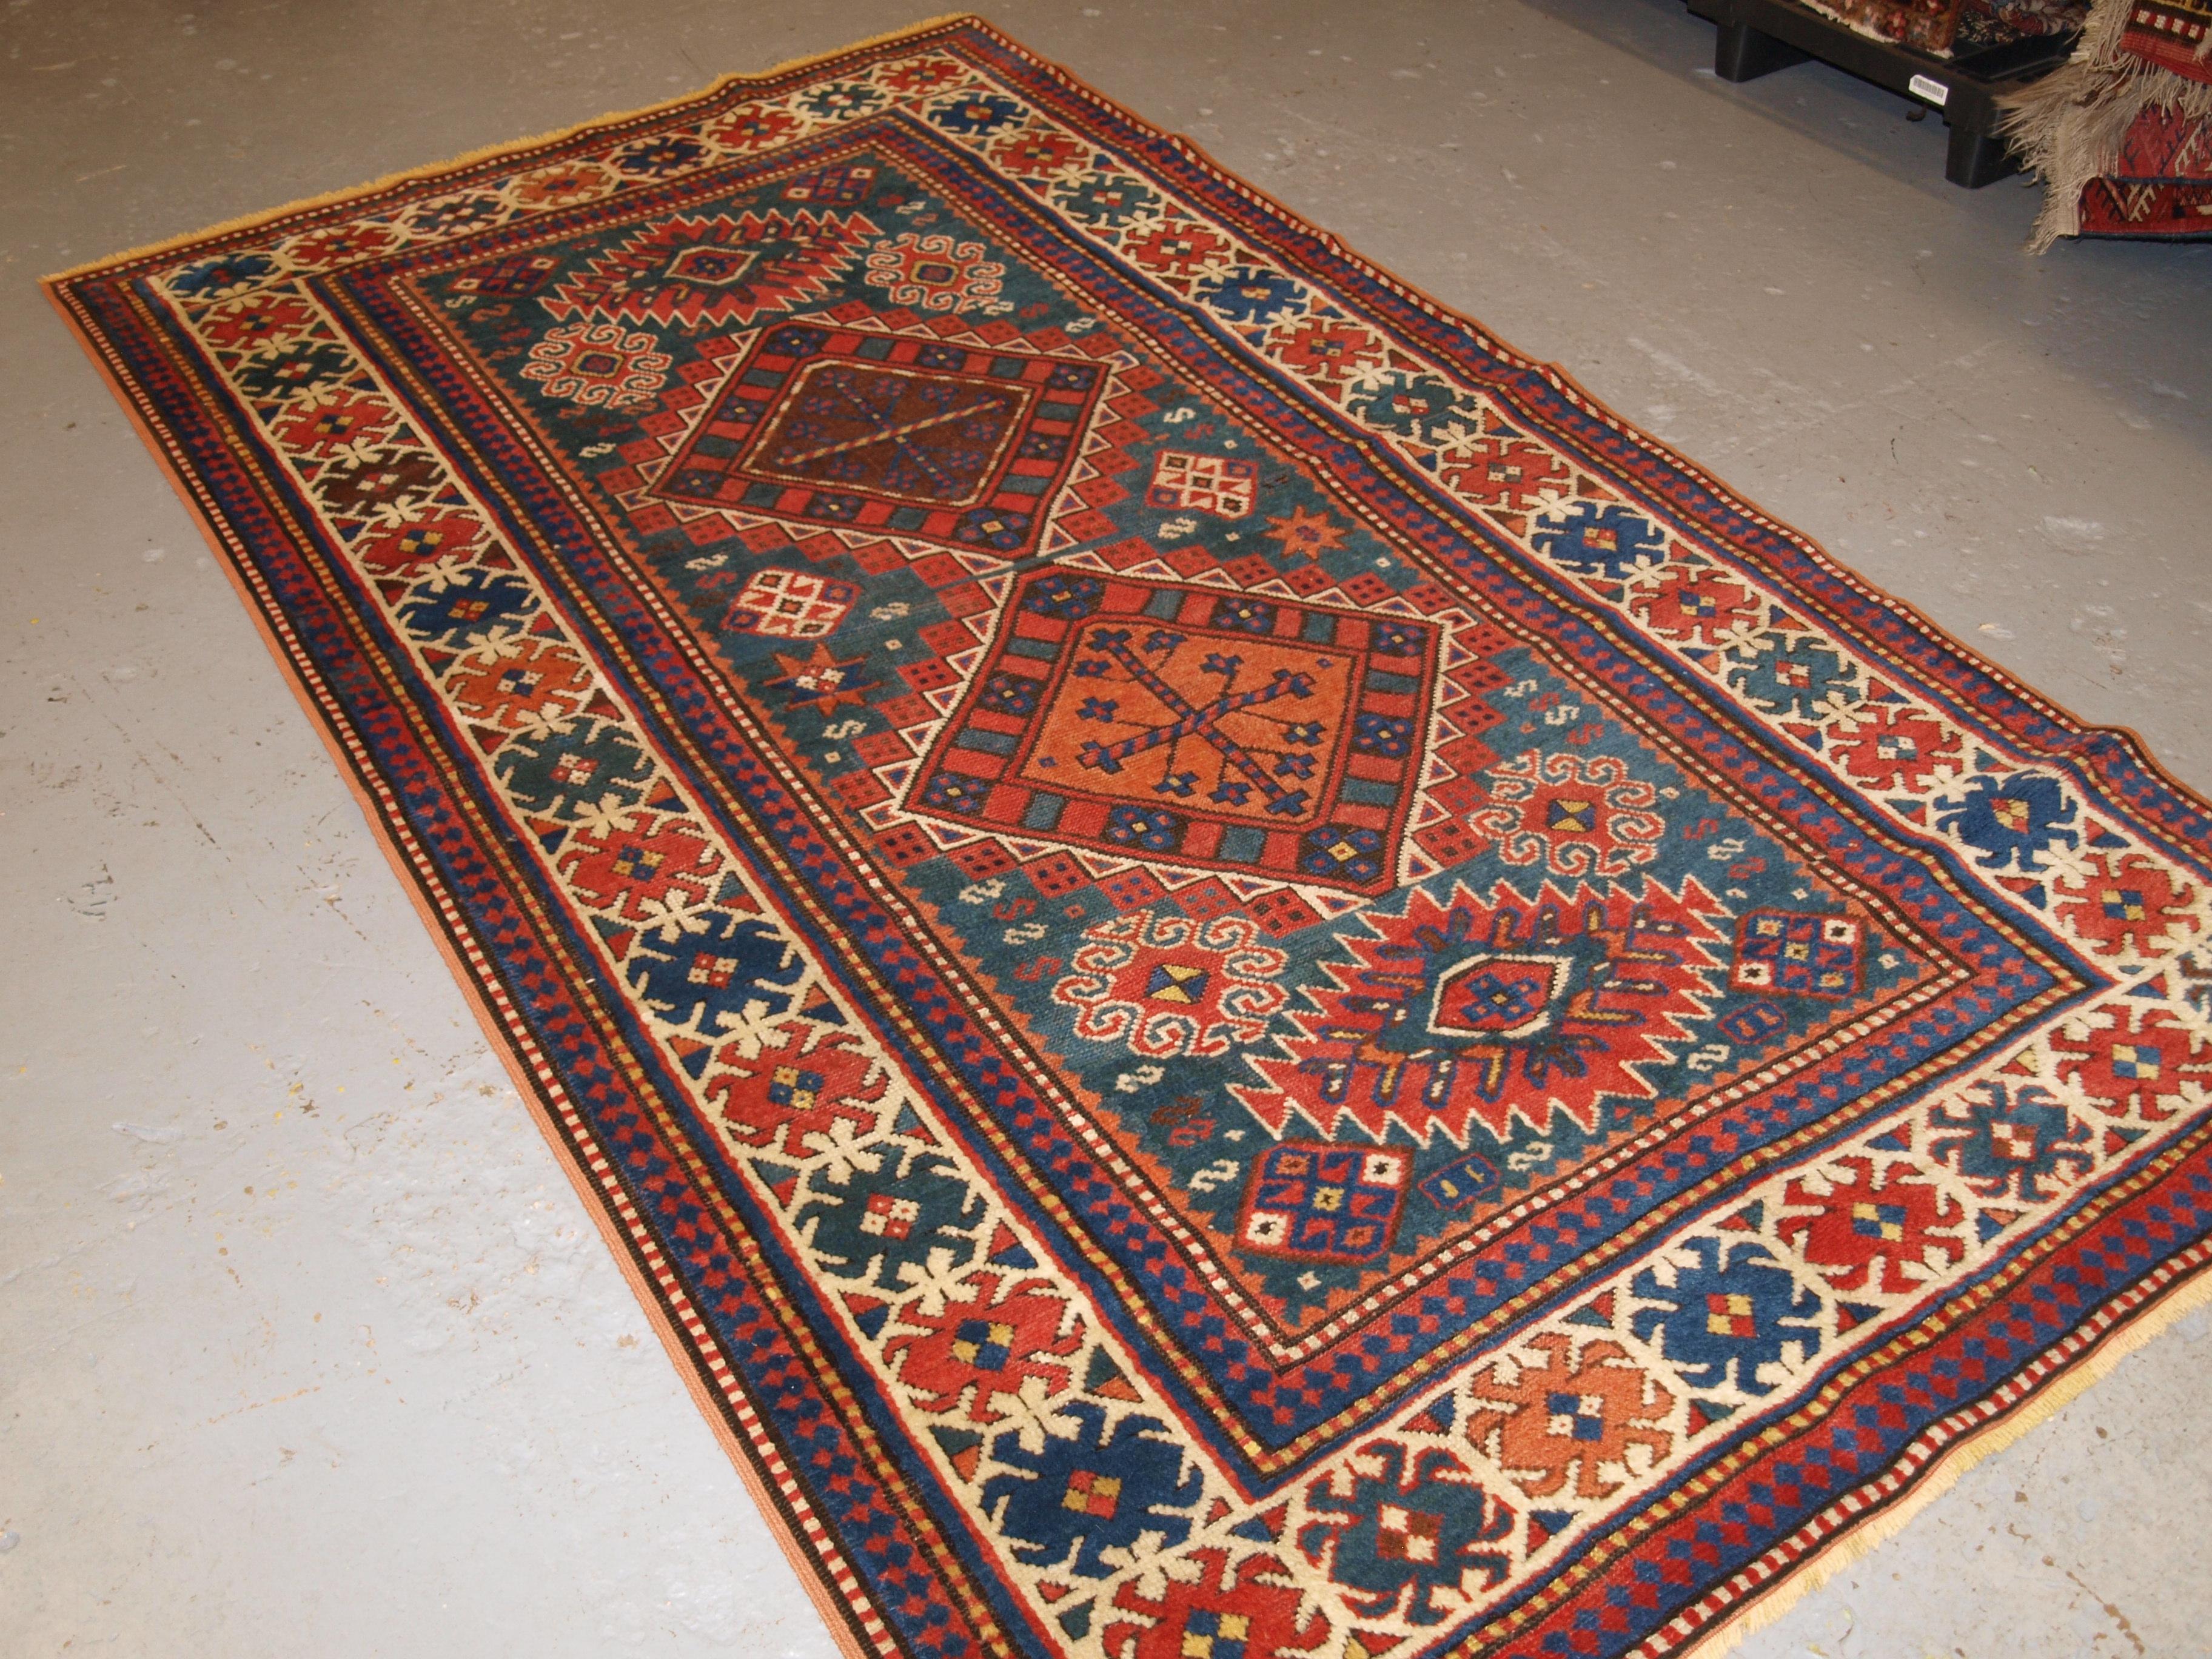 A good example of a Caucasian Karachov Kazak rug with the traditional linked medallion design, on a scare green ground. The rug has four linked medallions on a sea green field, the colour combinations make this a visually striking rug. Note the many